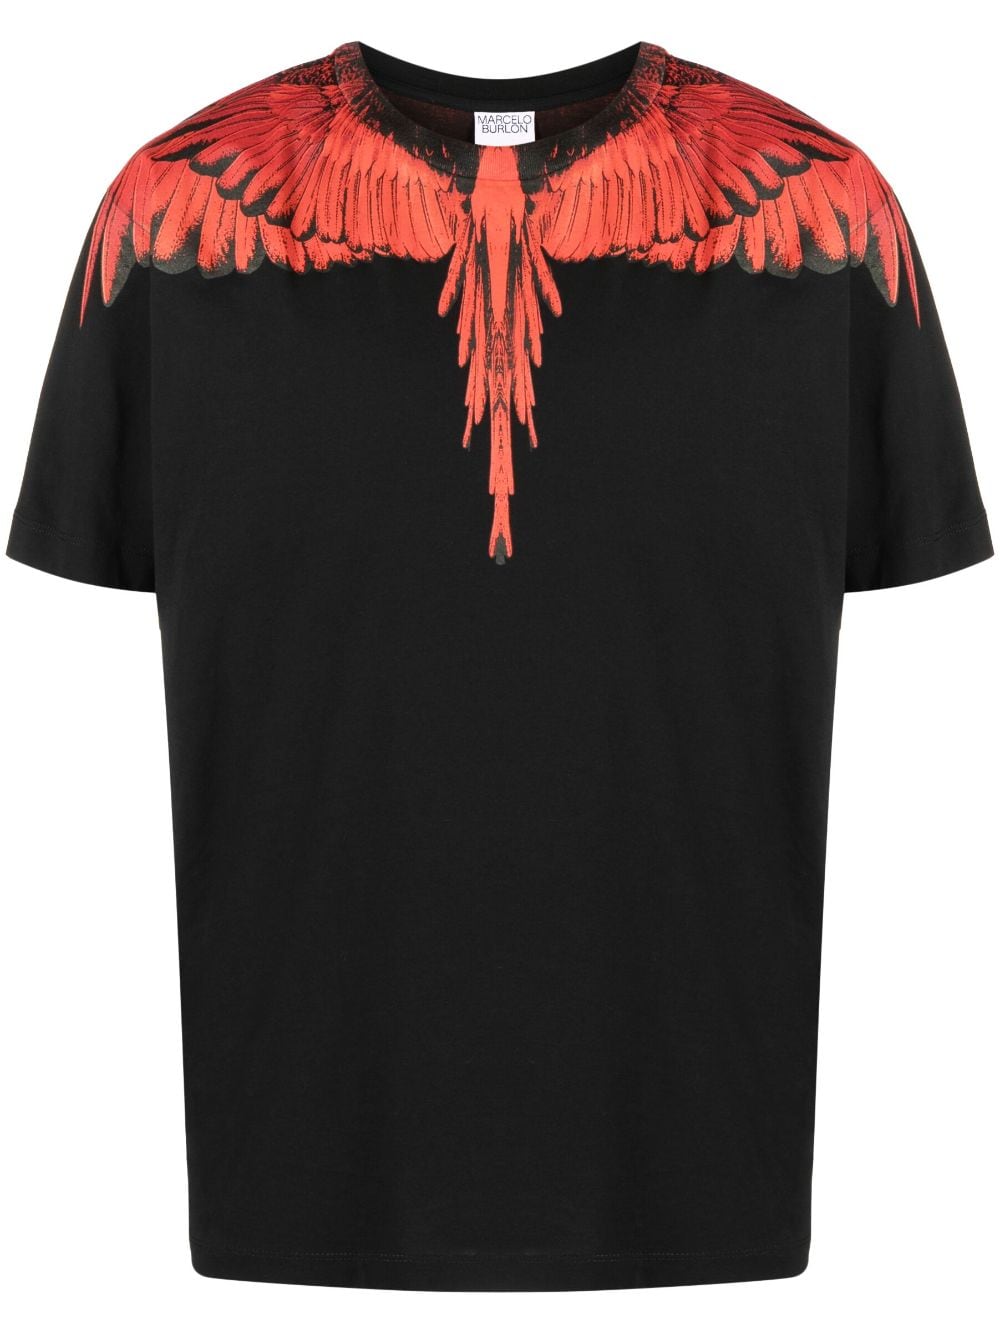 t-shirt icon wings red